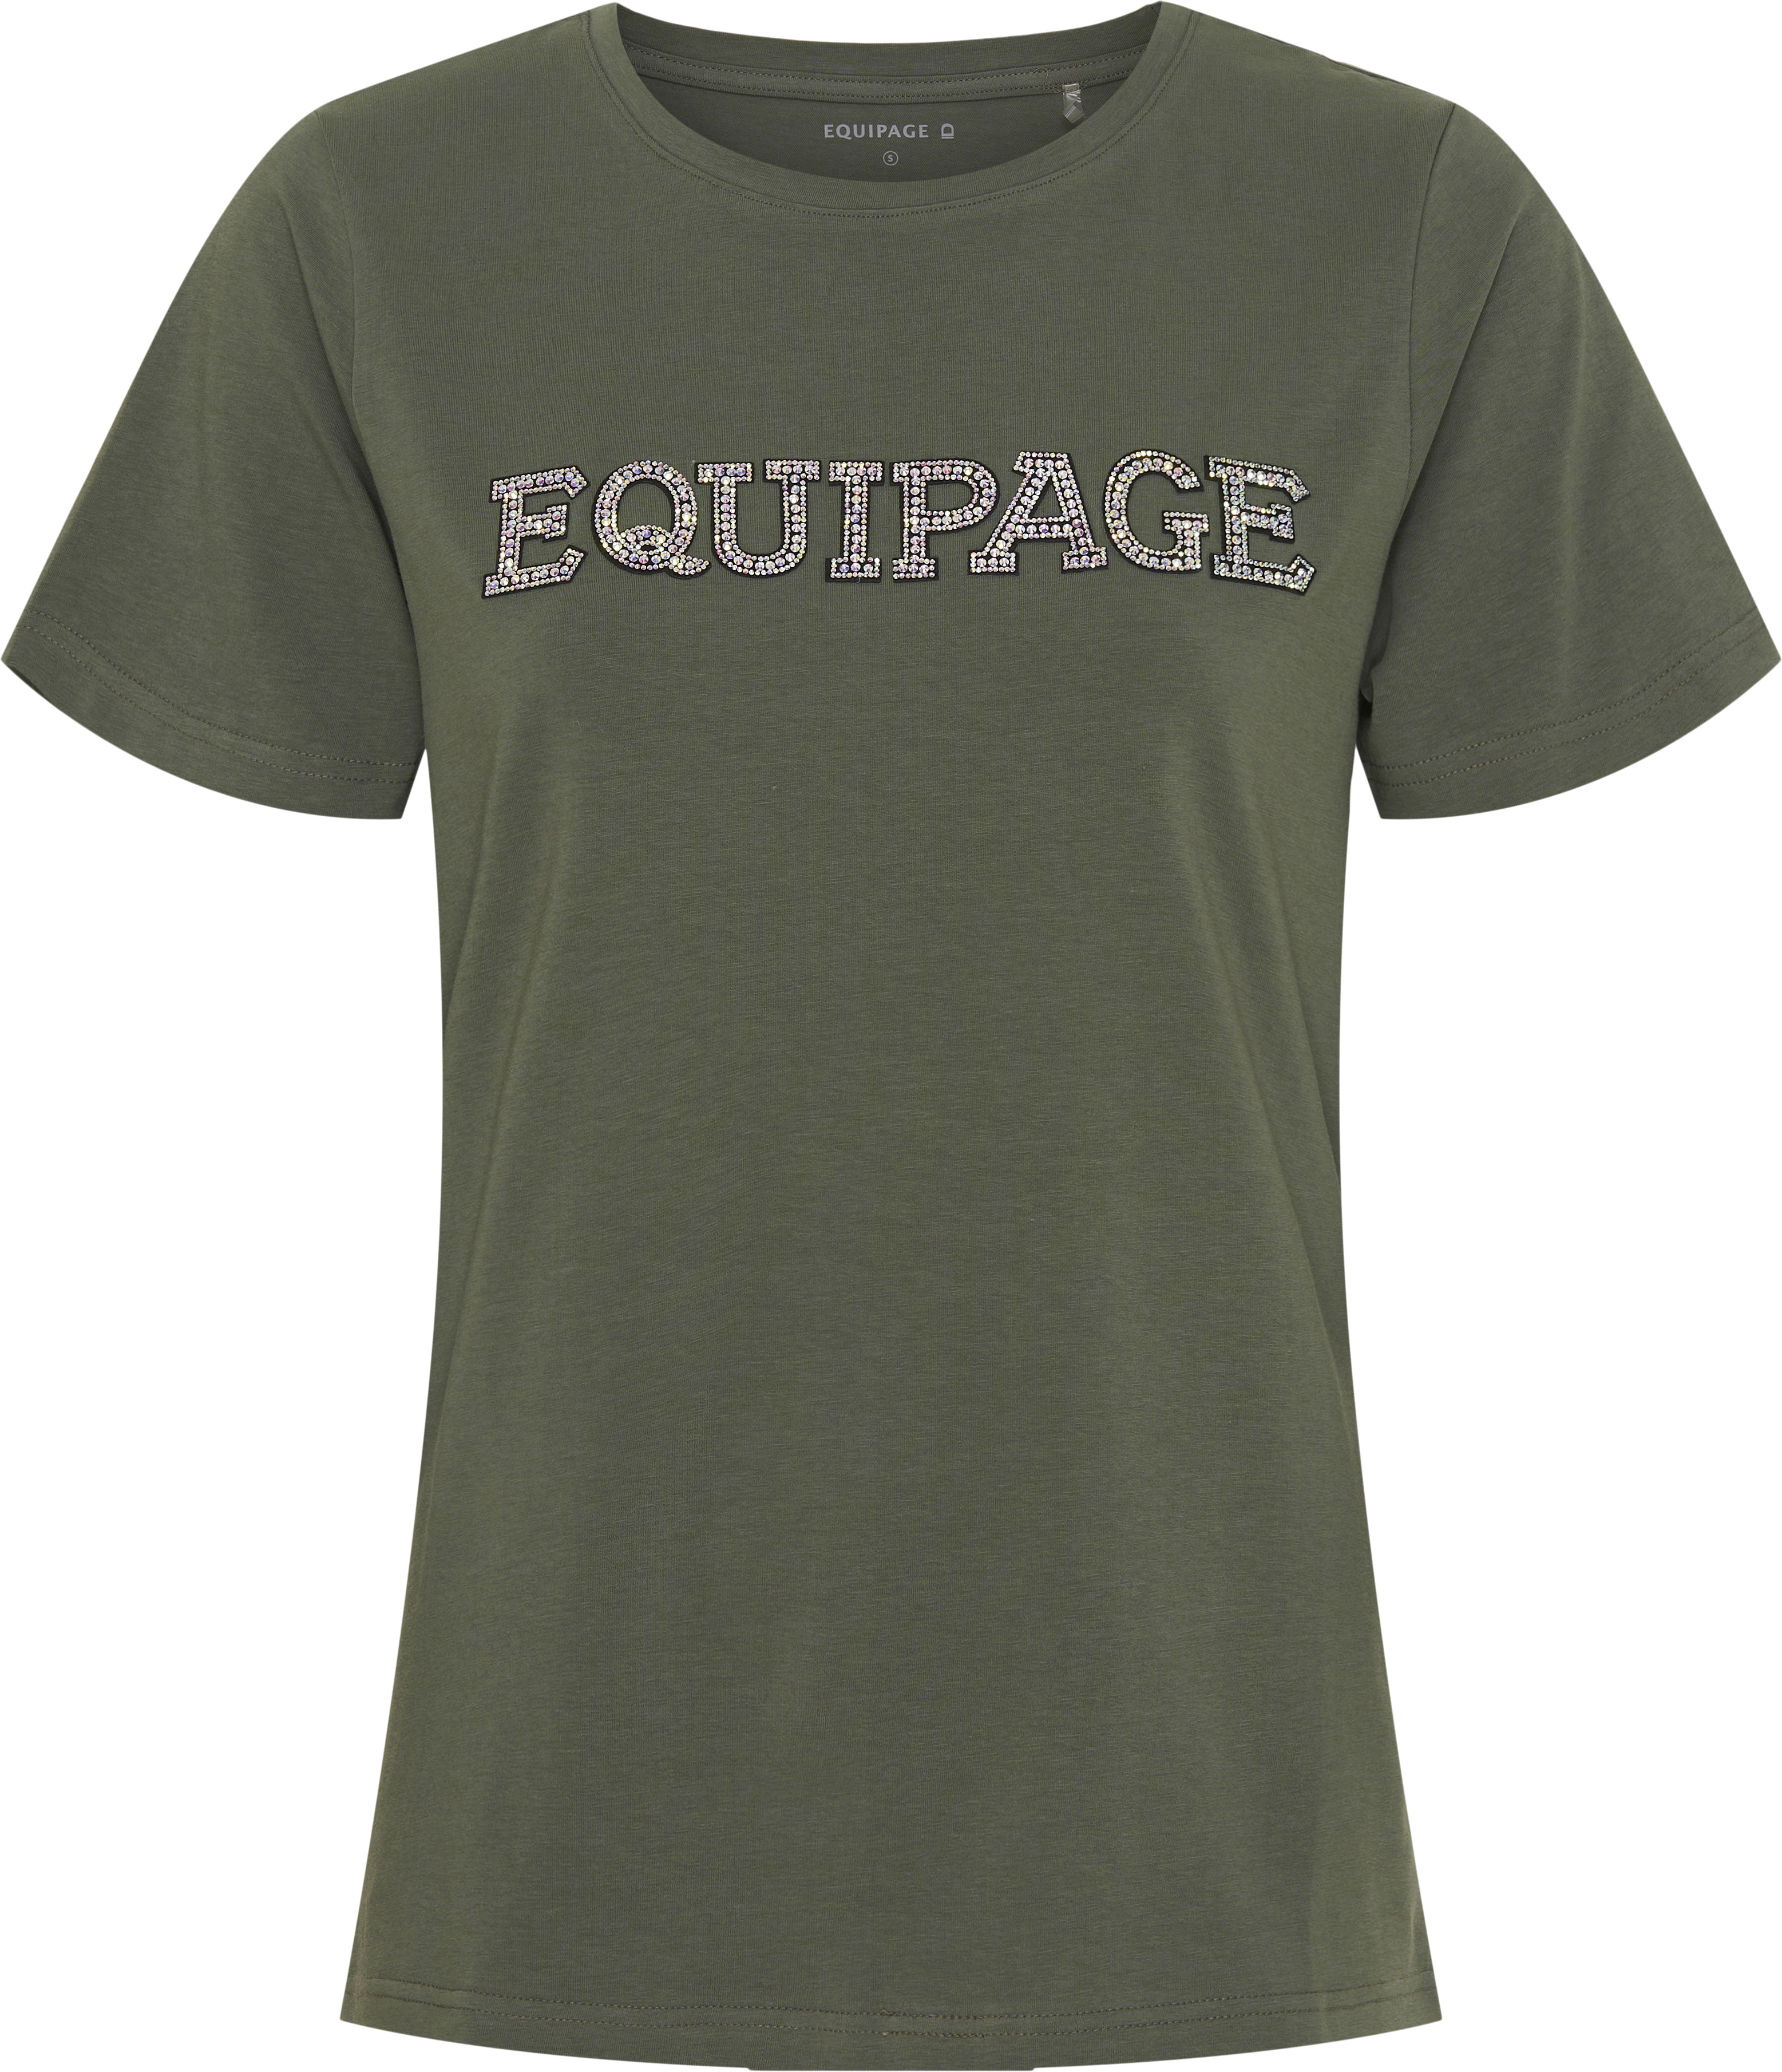 Equipage Melina T-Shirt - Forest (152)